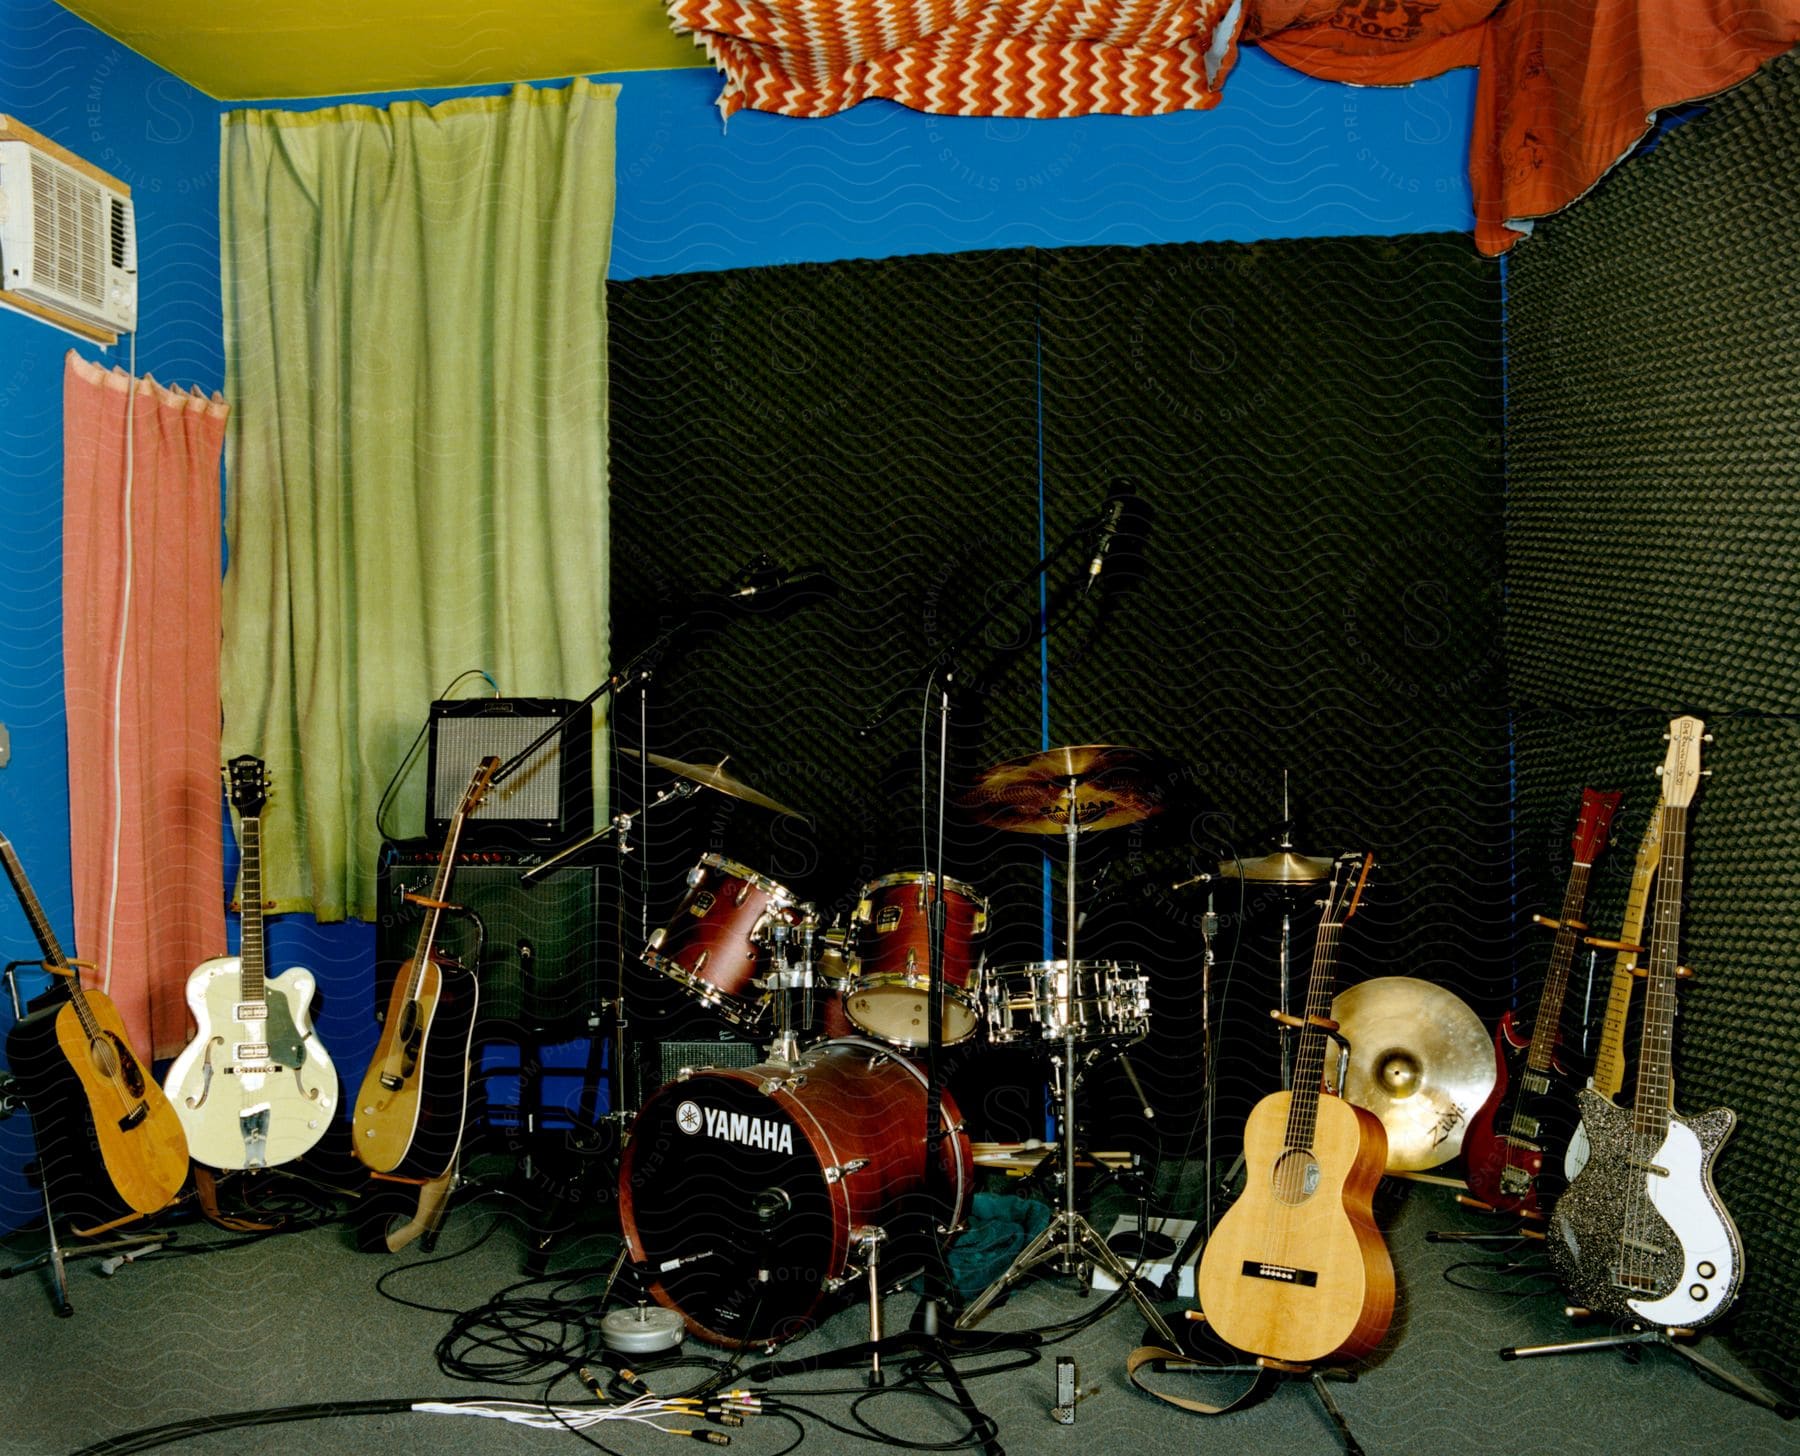 A drum set and guitars are set up on a small stage with amplifiers and musical equipment